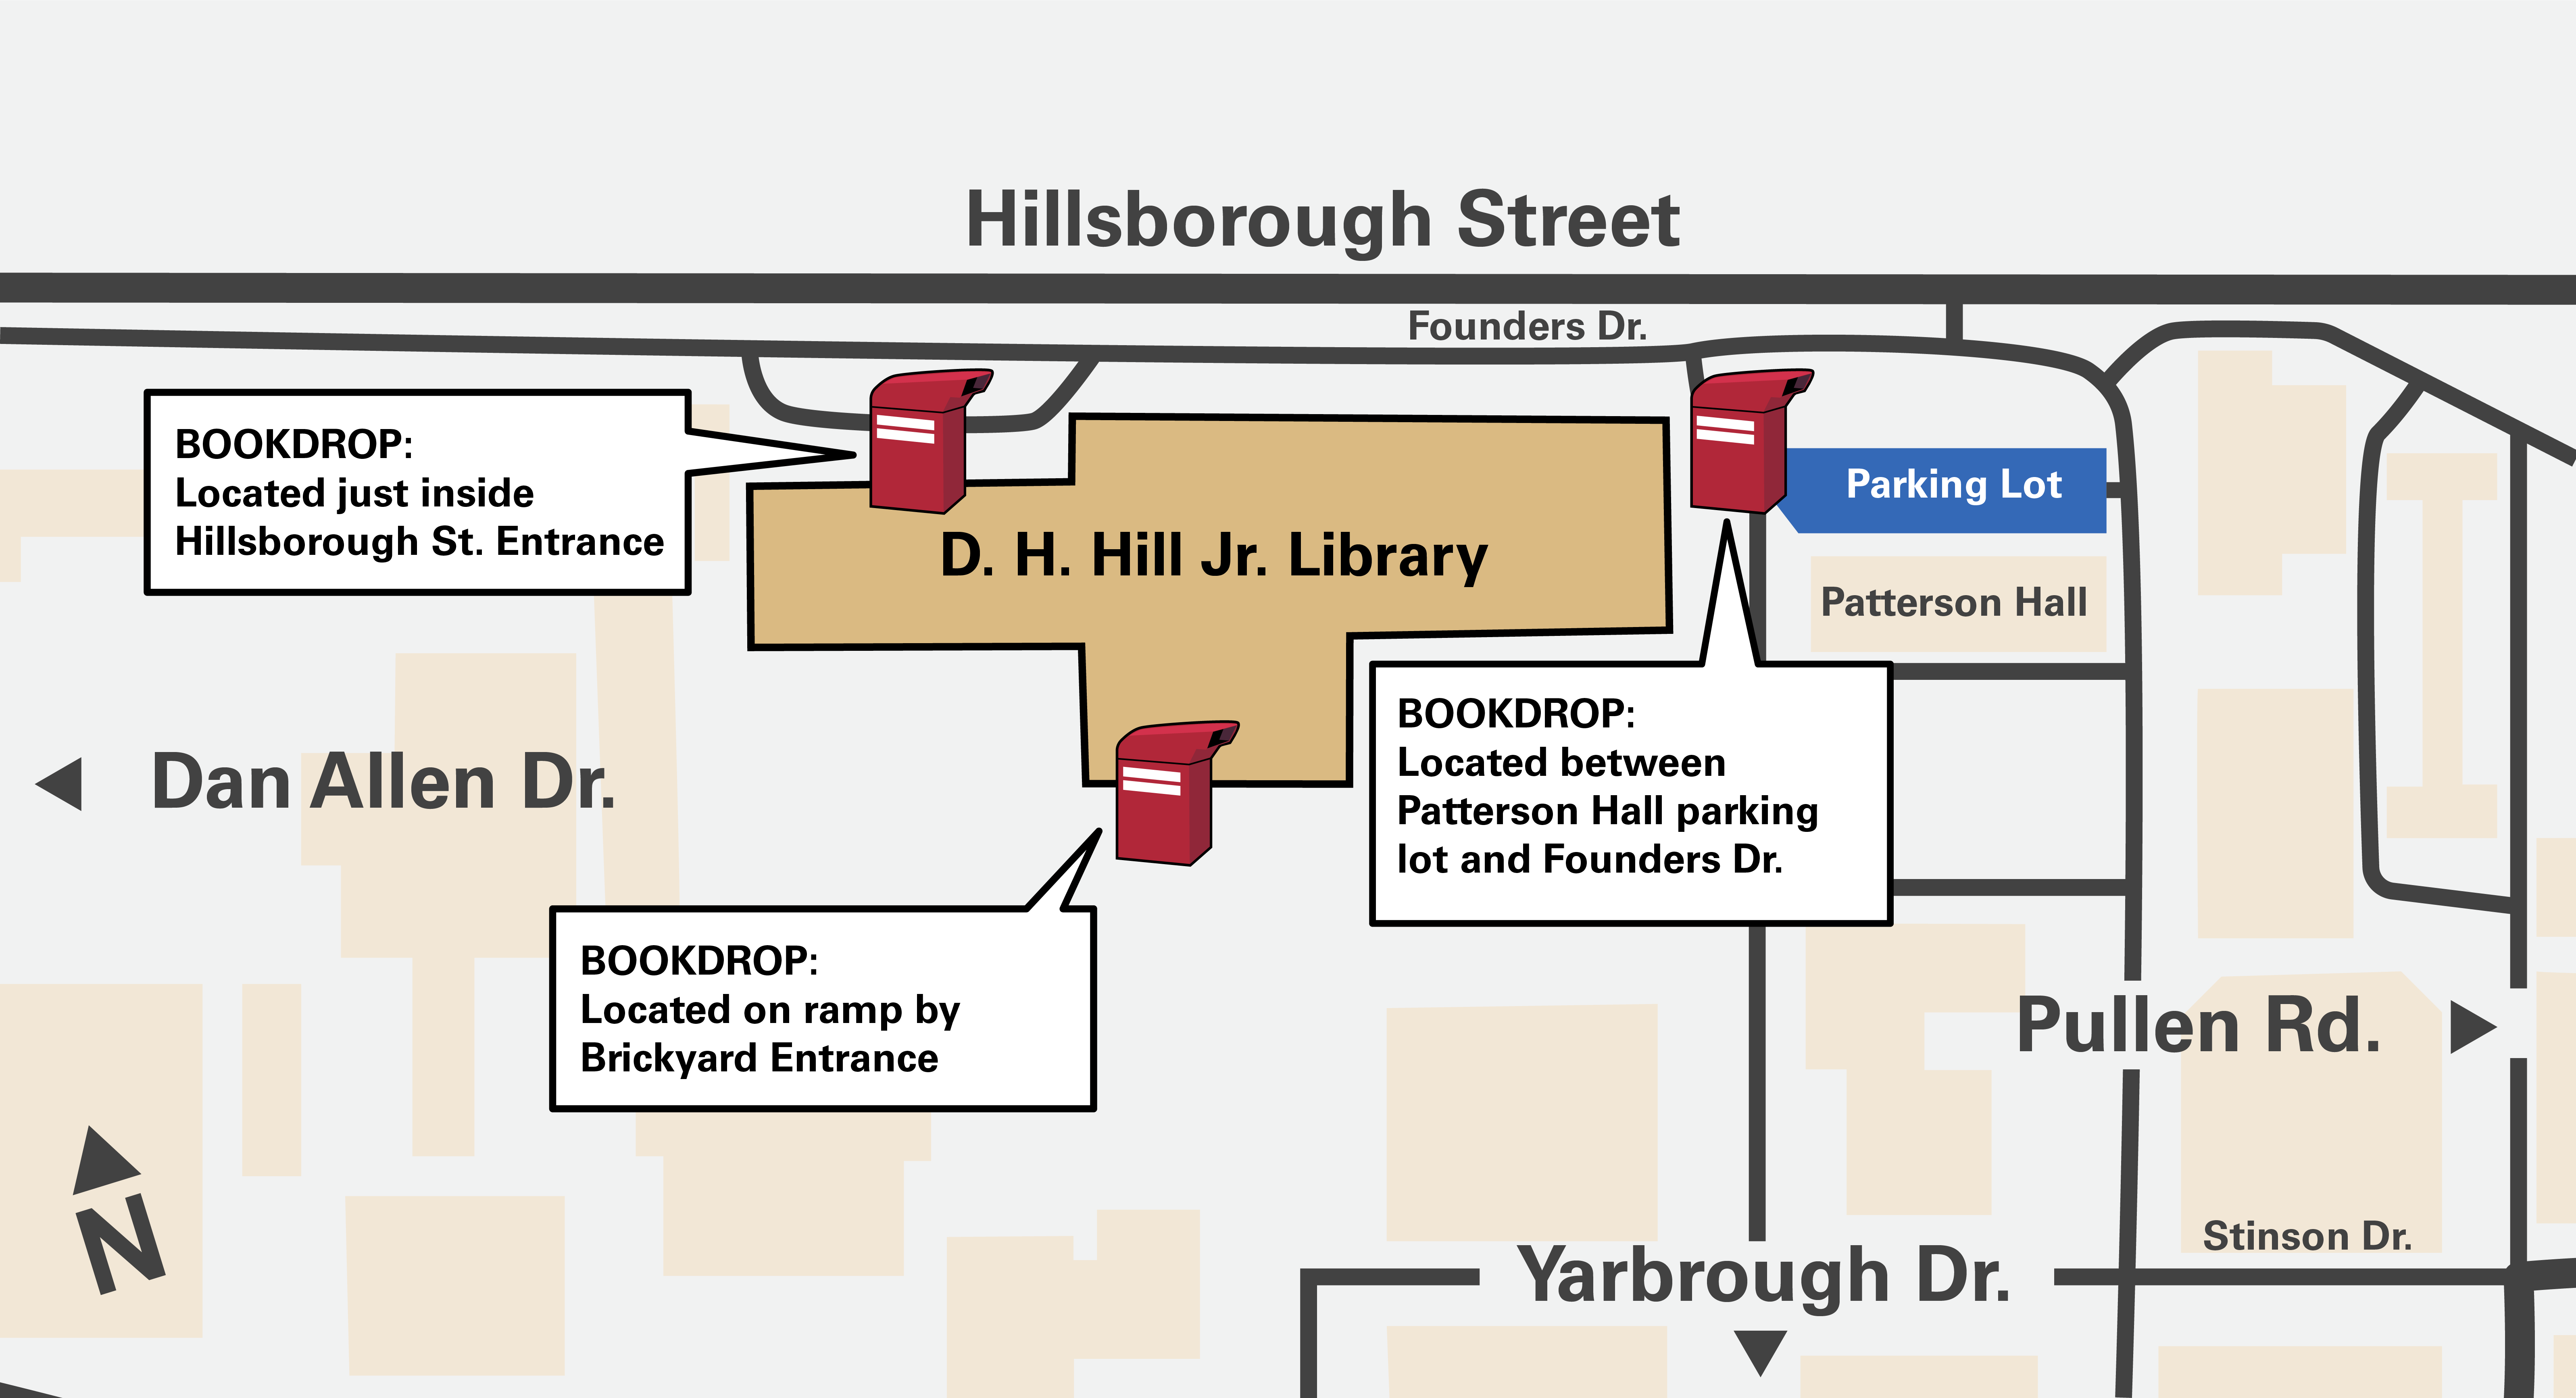 A bookdrop is located at the Hillsborough Street entrance to the Hill Library as well as on the east side of the building in the parking lot. A third bookdrop is located on the ramp by the Brickyard Entrance, outdoors.